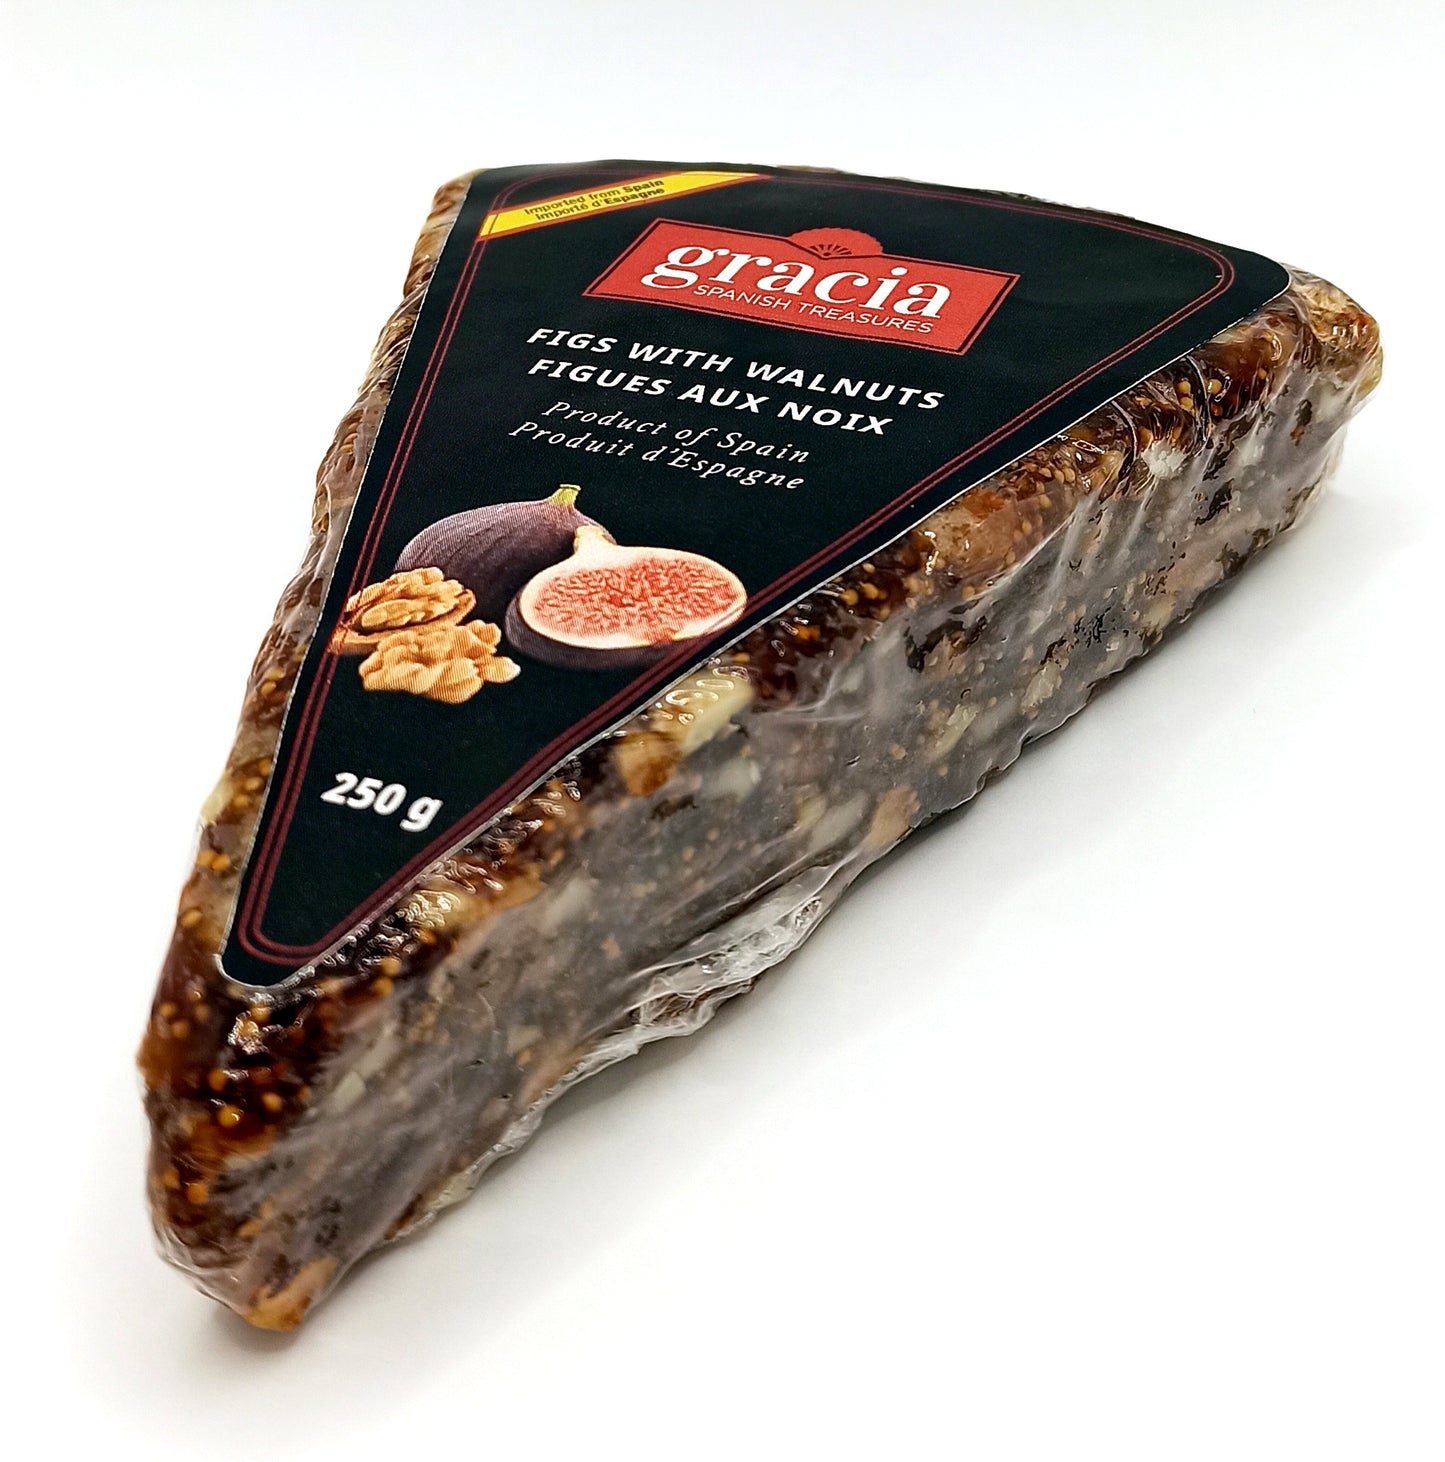 Gracia Variety Fig Cakes, Fig with Almonds, Fig with Walnuts and Date with Almonds (3 Pack)